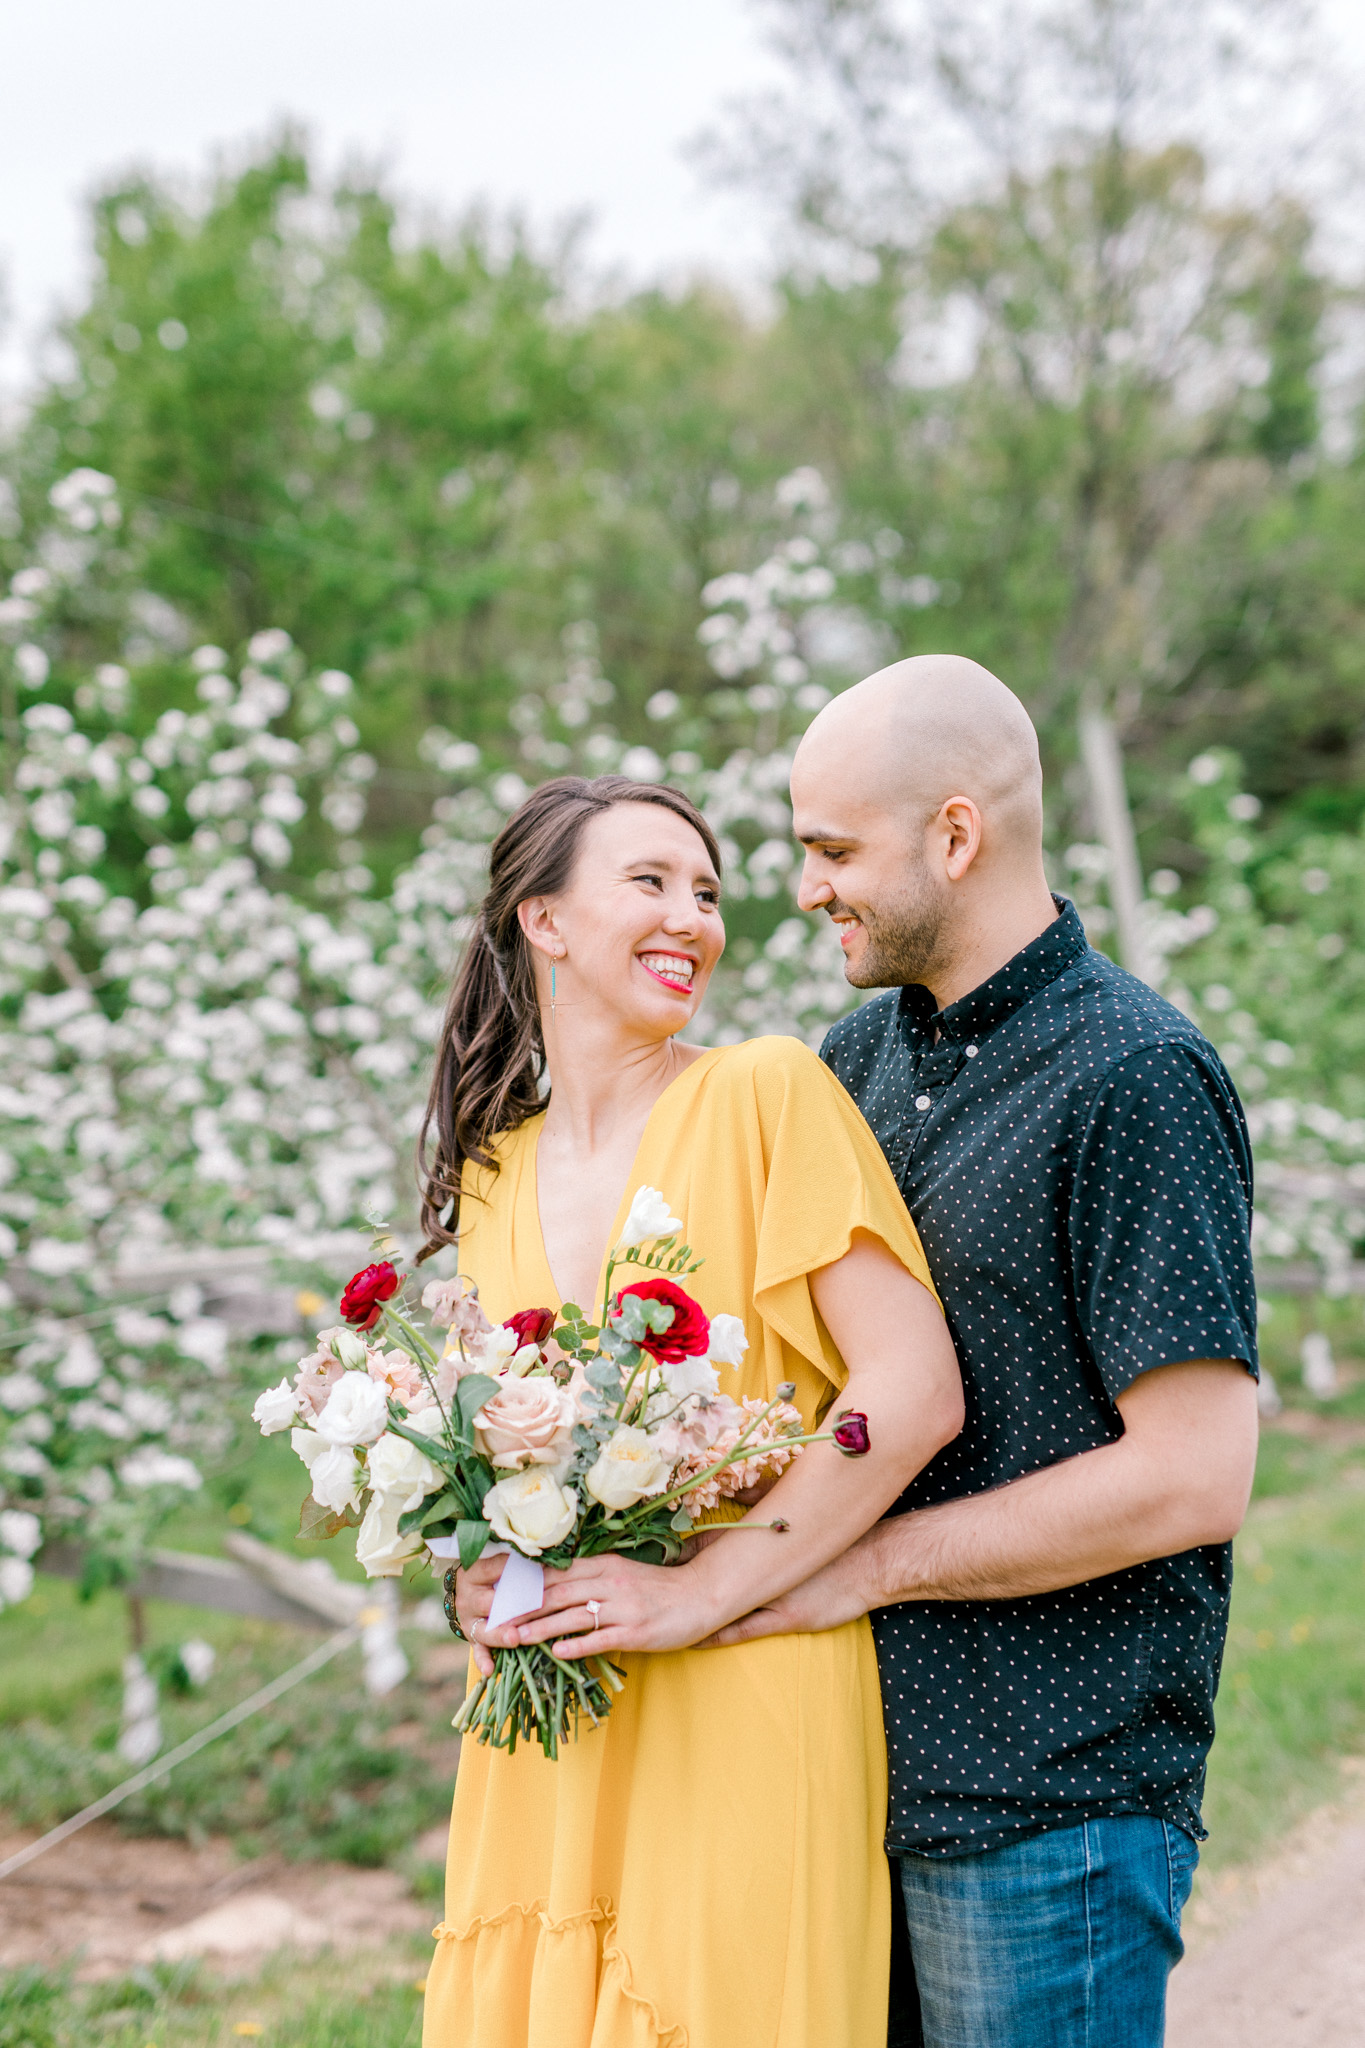 Spring Apple Blossom Engagement Session at the Orchard | Engagement Bouquet | Mustard Yellow Dress | What to Wear to Your Engagement Session | Grand Rapids Wedding Photographer